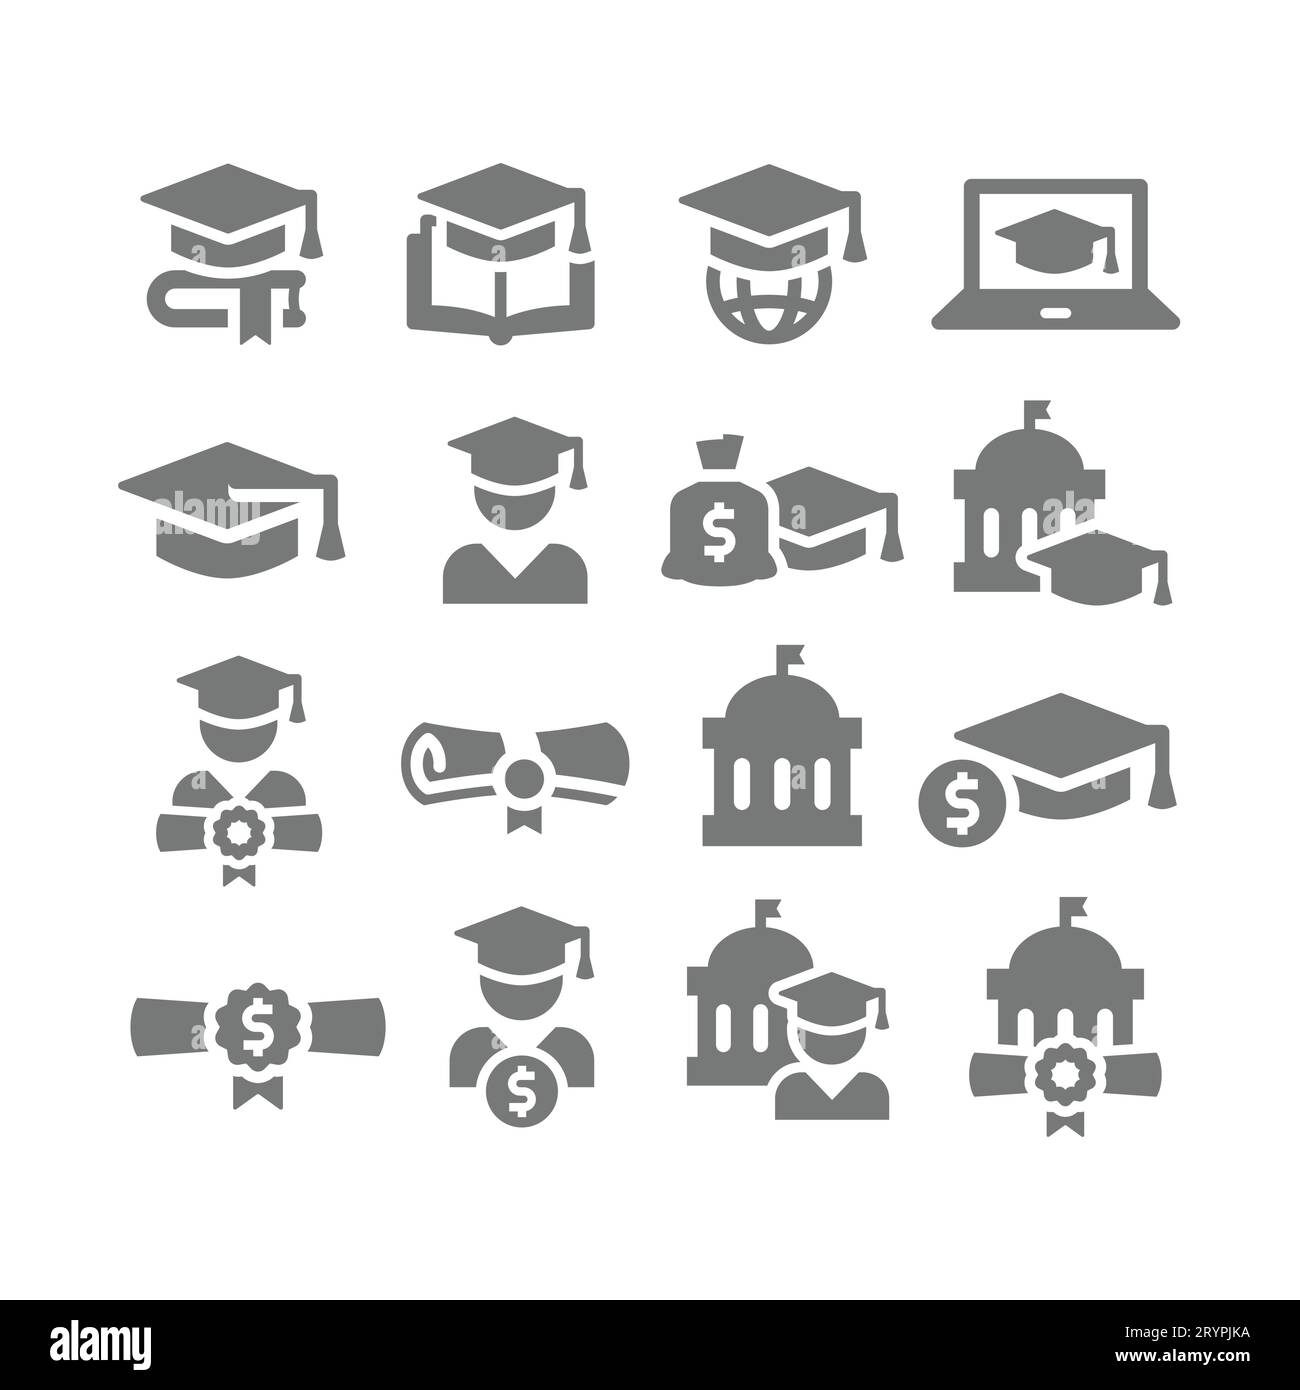 University and student vector icon set. Fee and education cost icons. Stock Vector